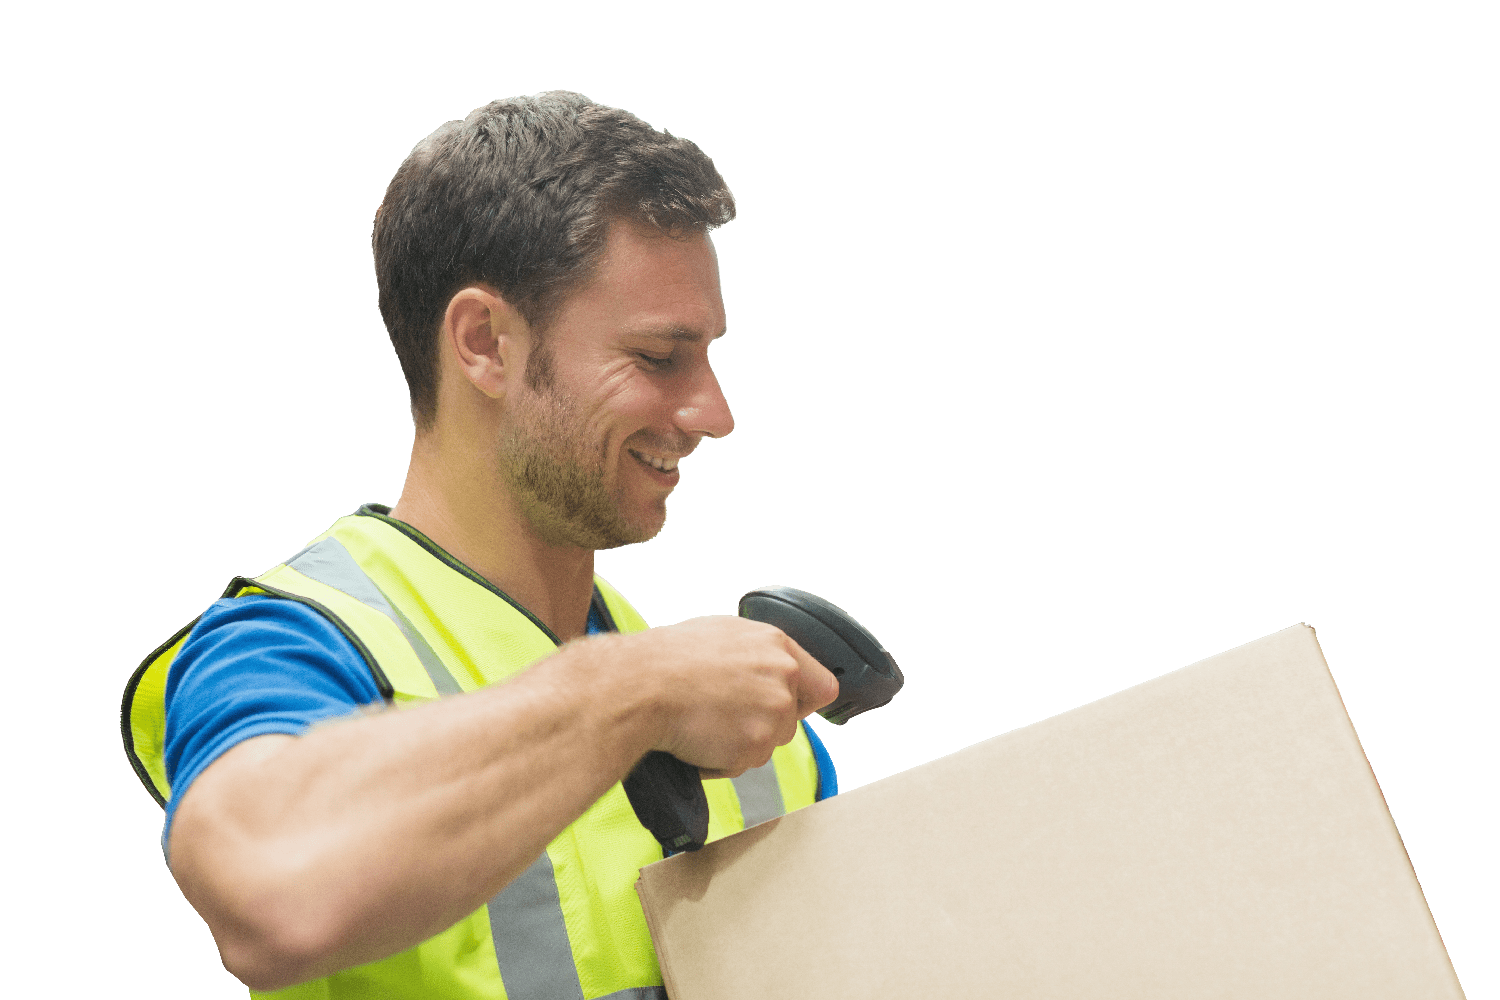 A man in a safety vest using a hand-held scanner to scan a package.